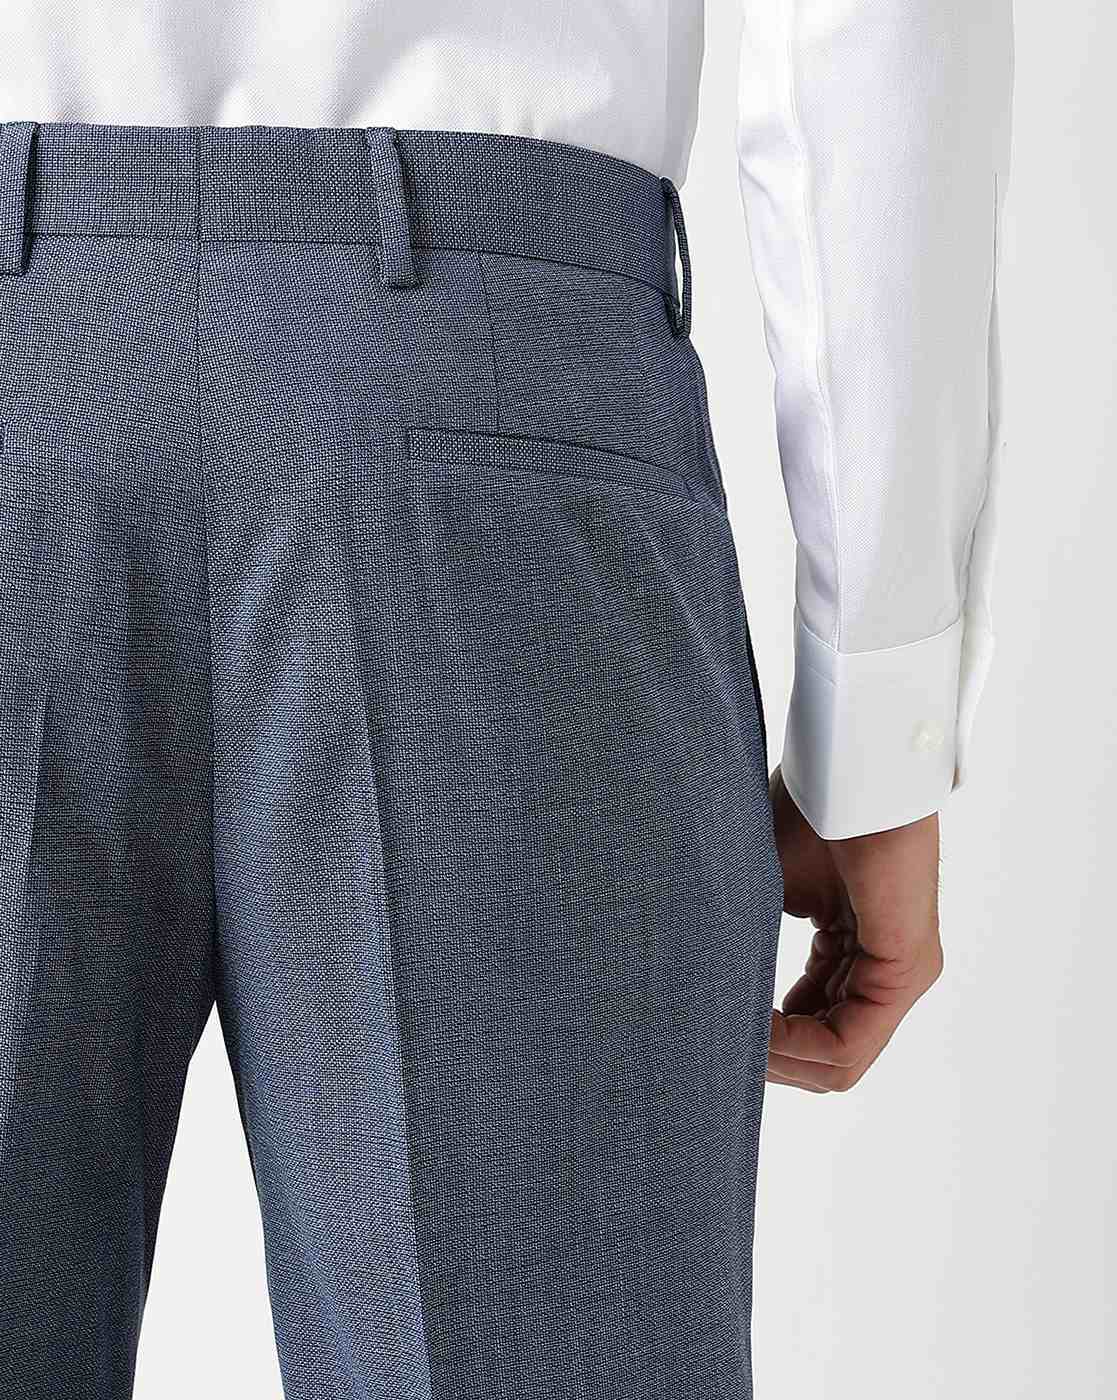 Luxe Slim Comfort B-95 Formal Grey Check Trouser - Norm